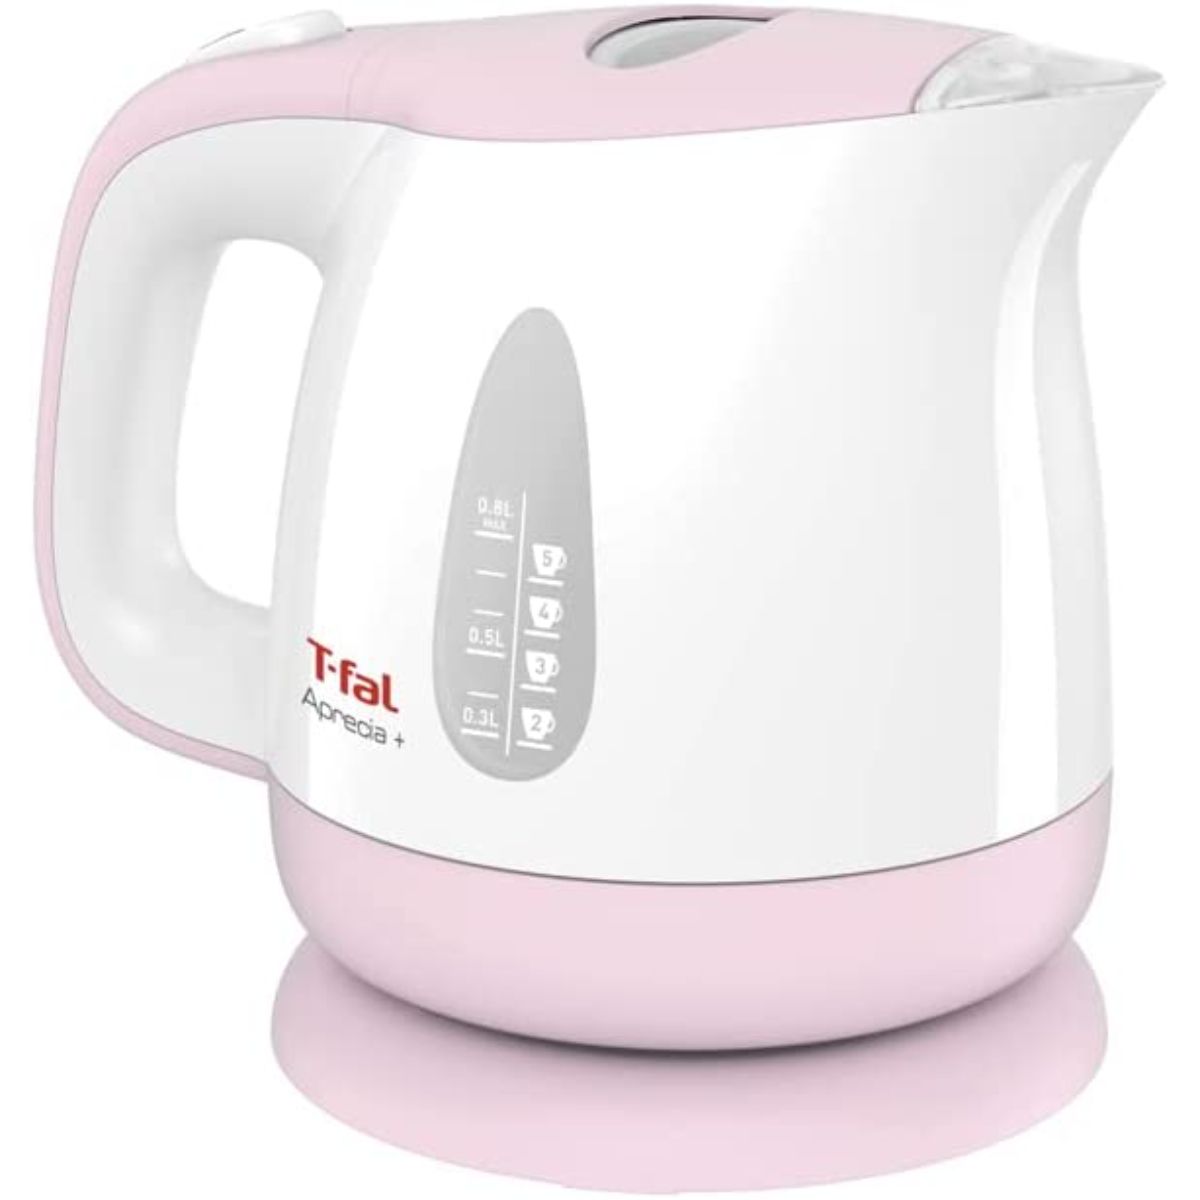 T-fal 電気ケトル 0.8L 軽くてコンパクト アプレシア・プラス シュガーピンク